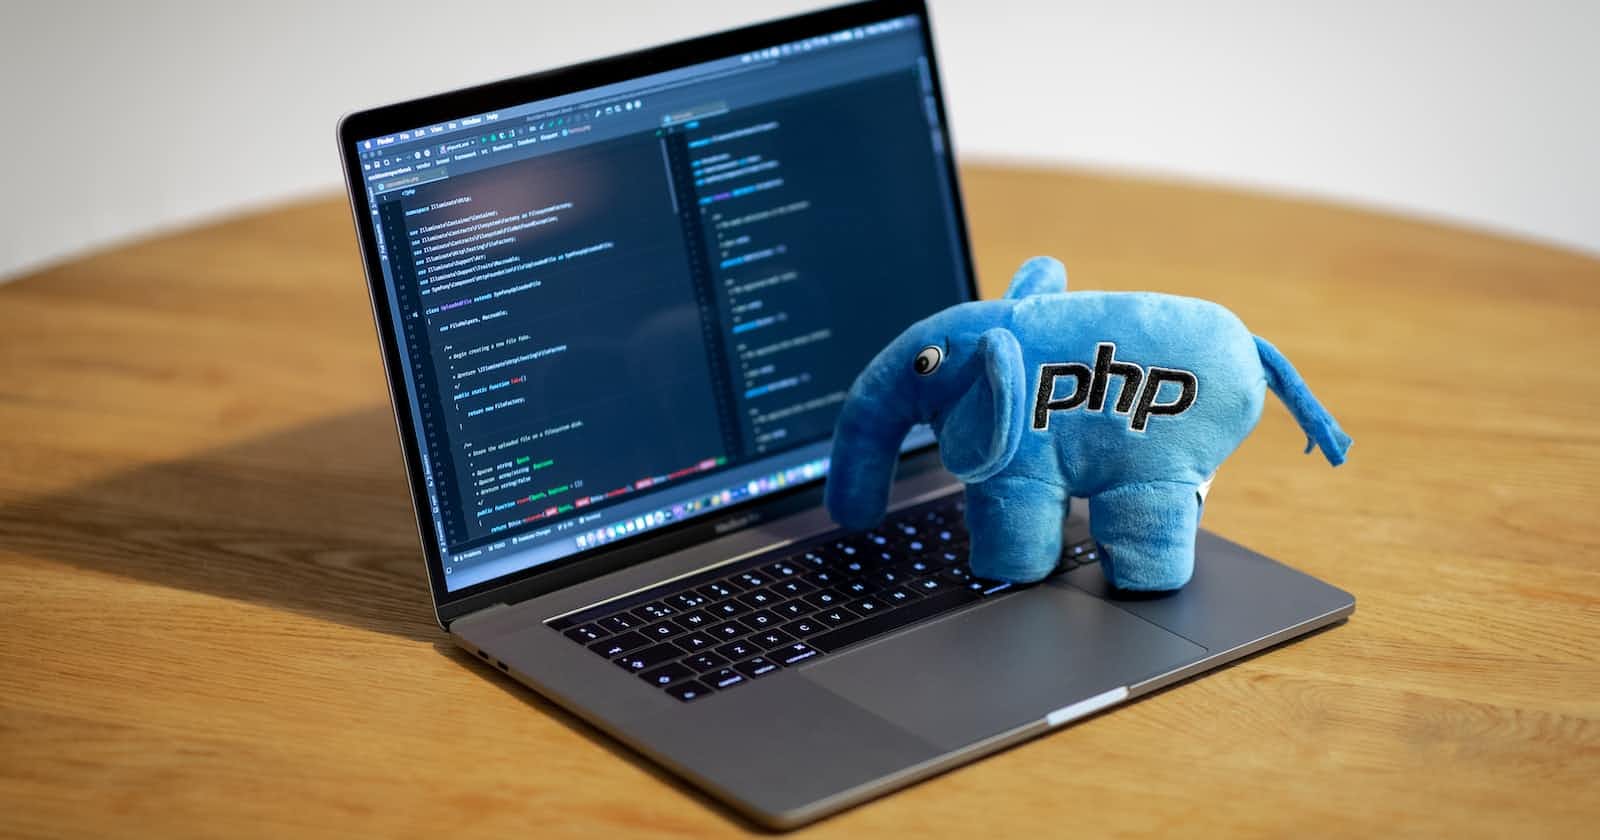 Some exciting things about PHP